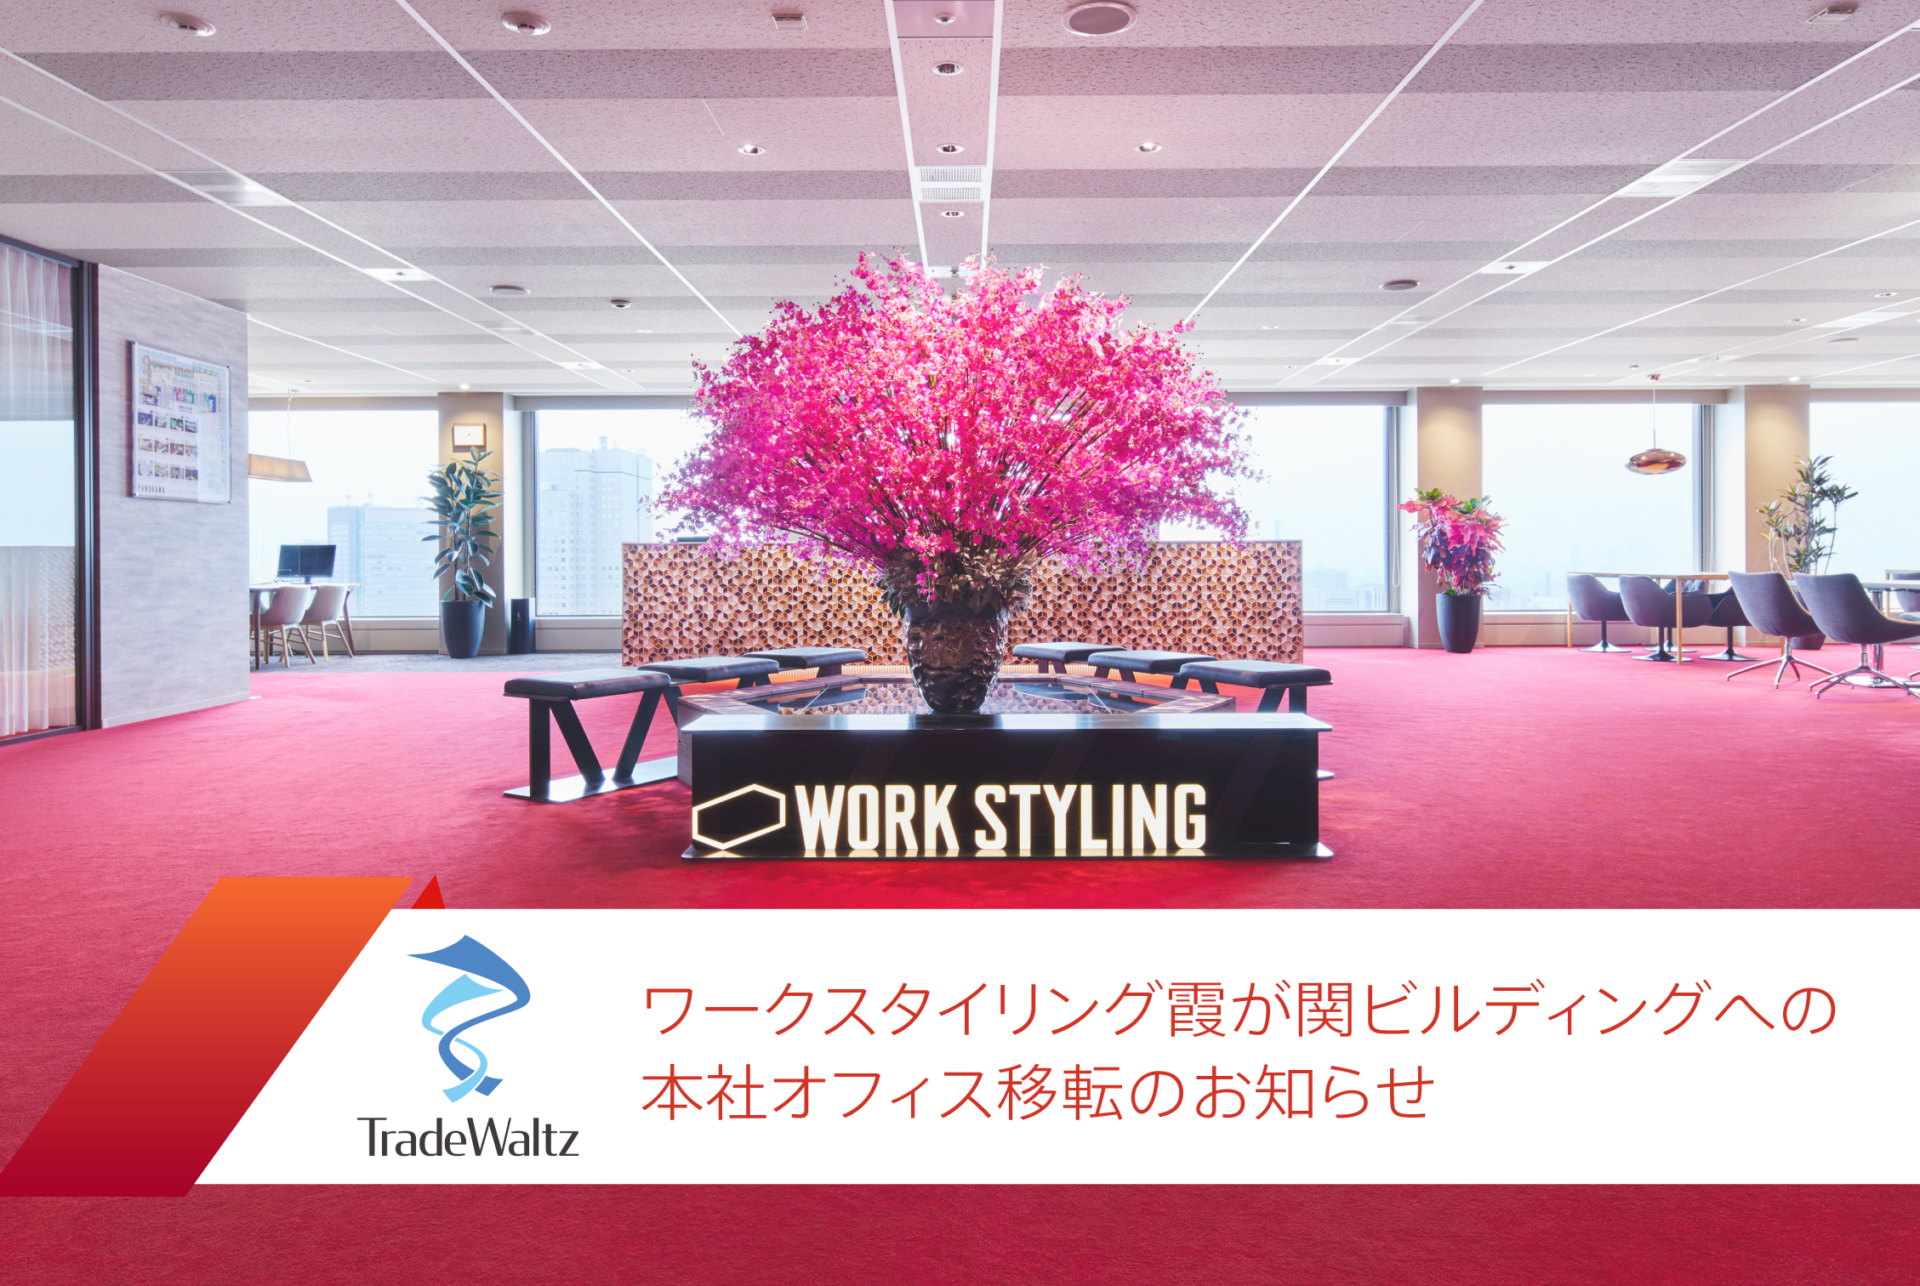 TradeWaltz Inc., a company to promote Trade DX, relocated its headquarters to the Work Styling Kasumigaseki Building – Aiming to further diversify work styles